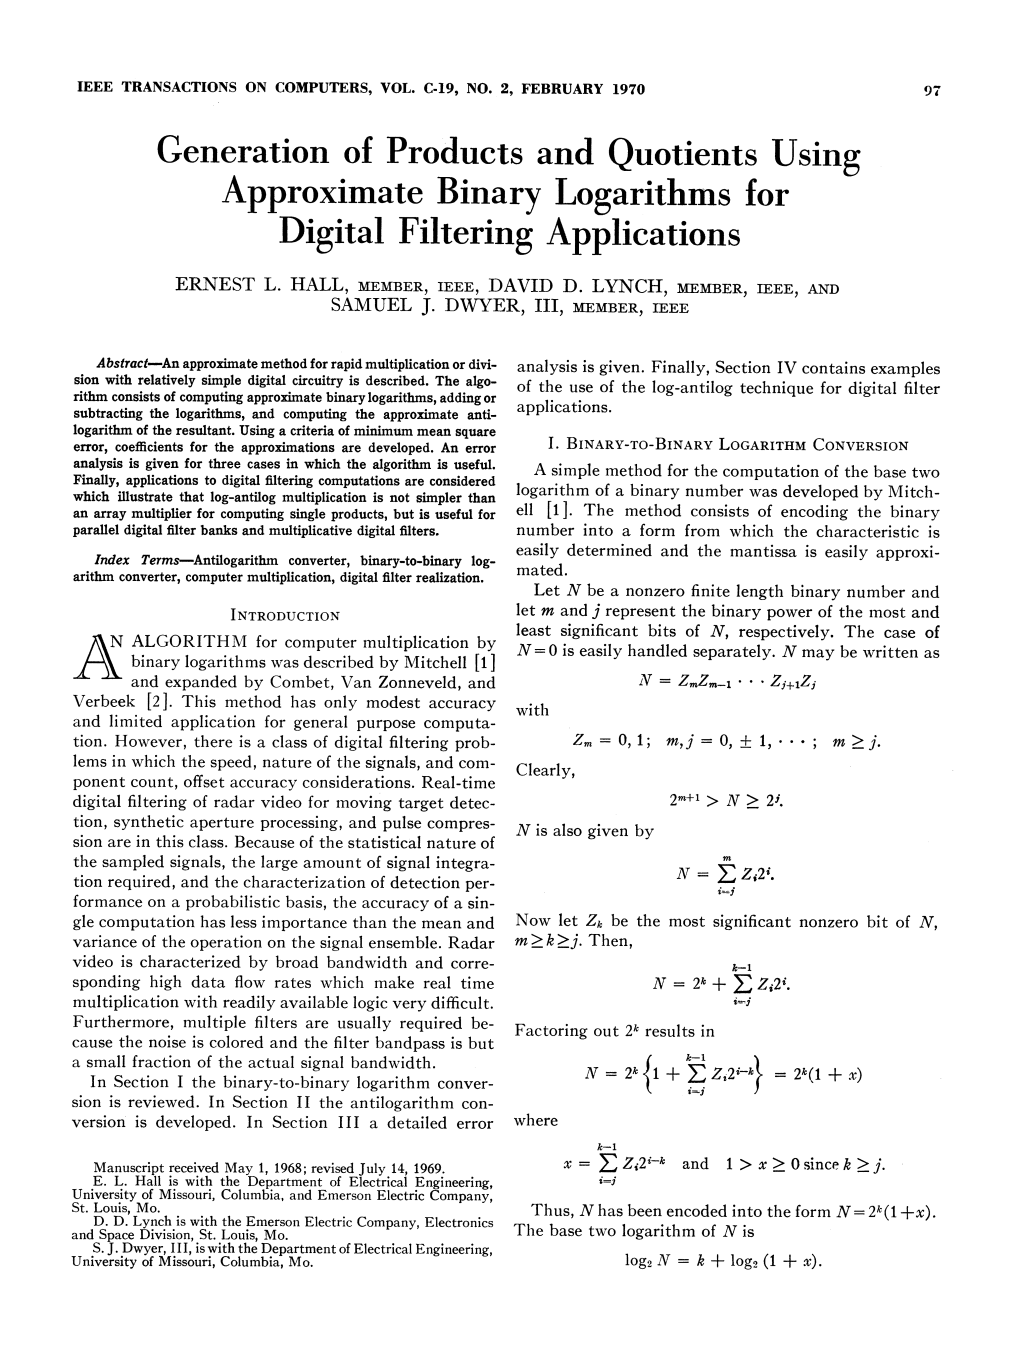 Approximate Binary Logarithms for Digital Filtering Applications